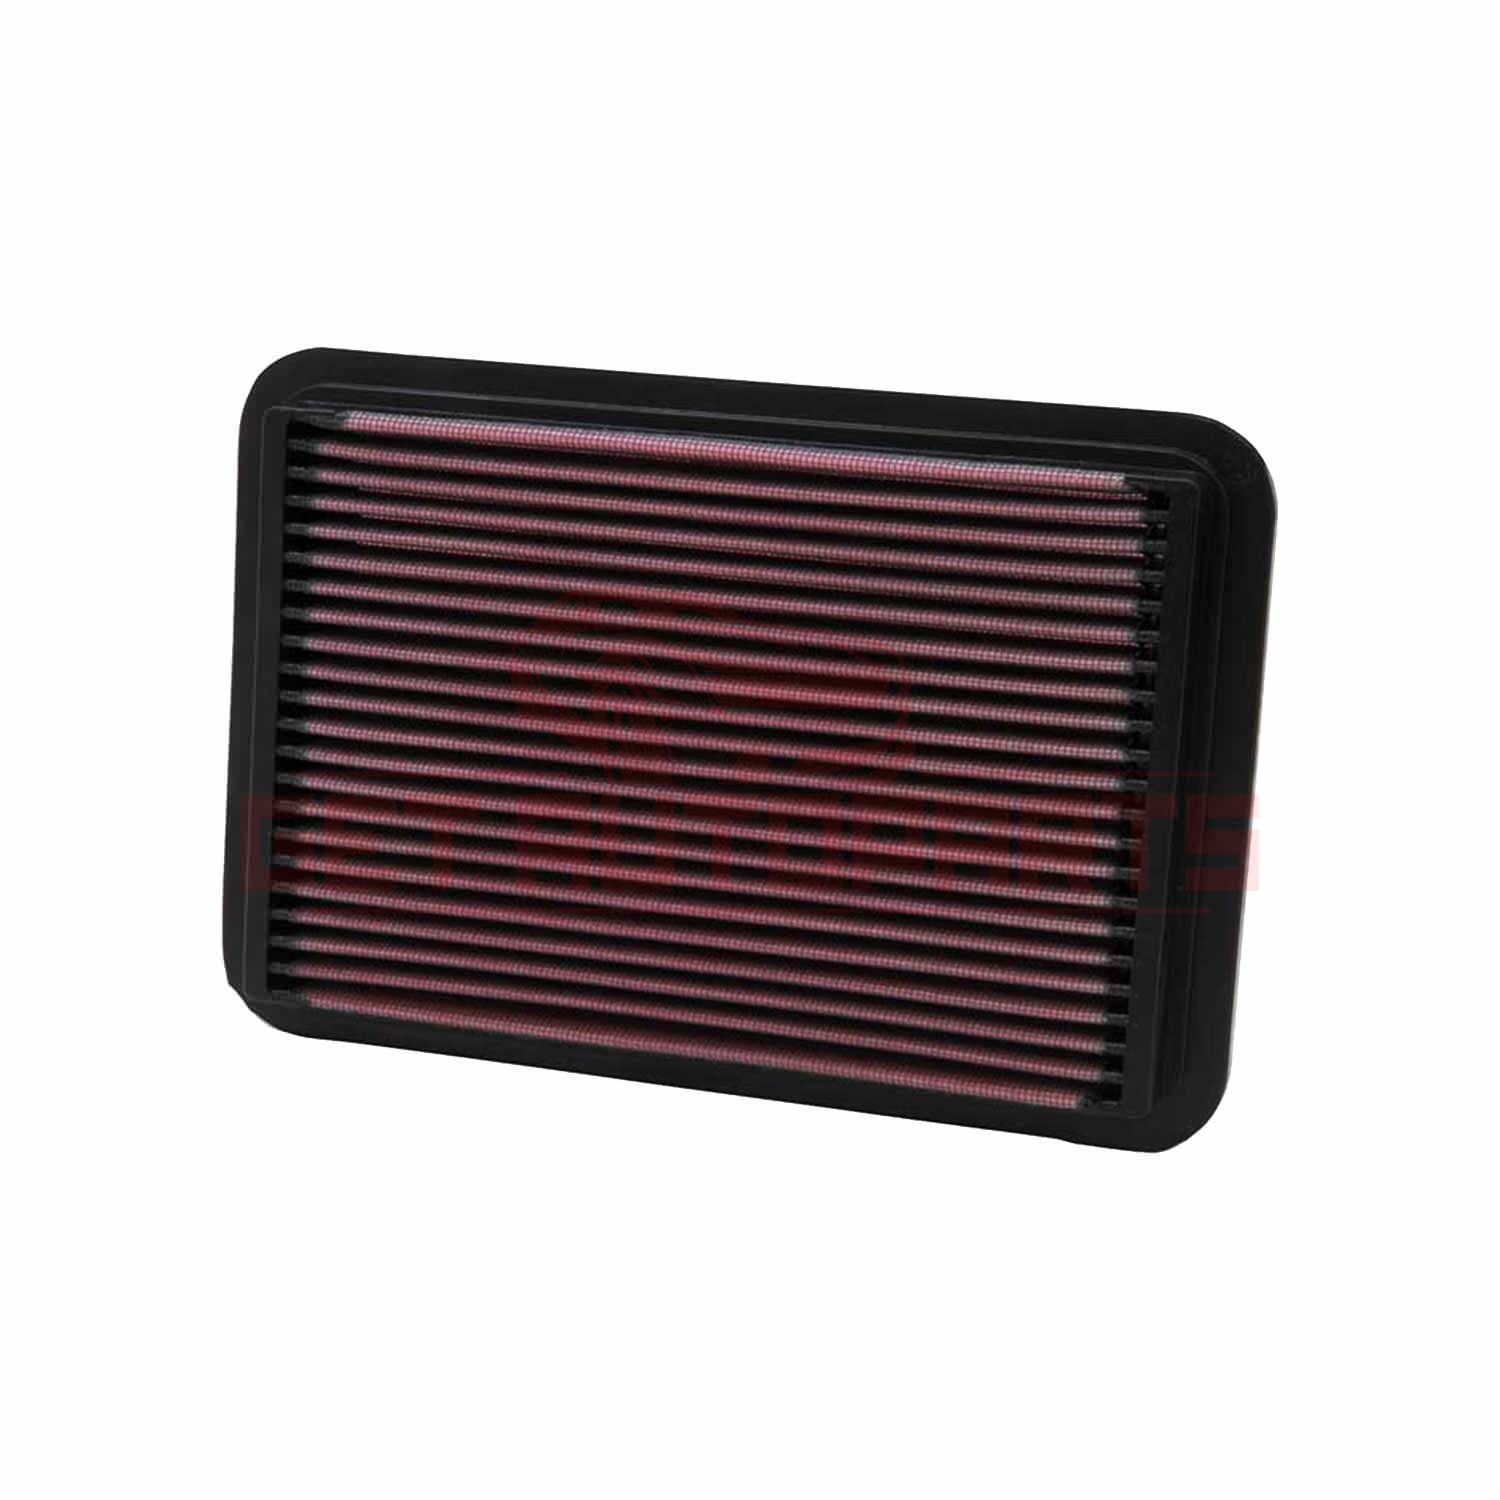 K&N Replacement Air Filter for Mazda 929 1992-1995